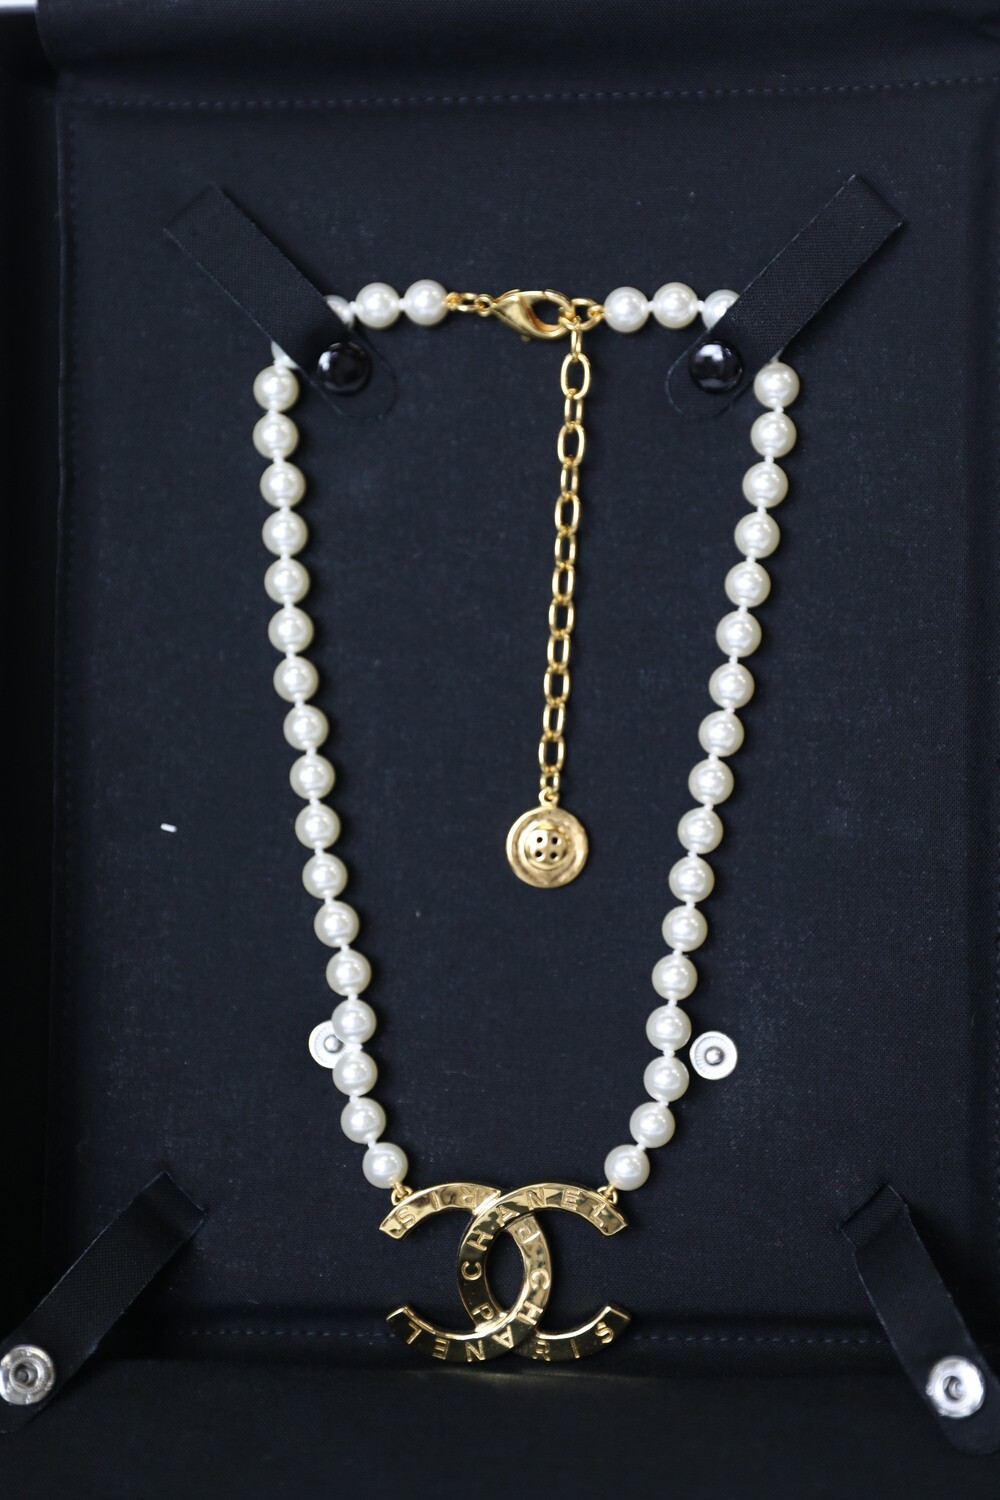 Chanel Necklace, Pearls with Golden CC and Button, Preowned in Box